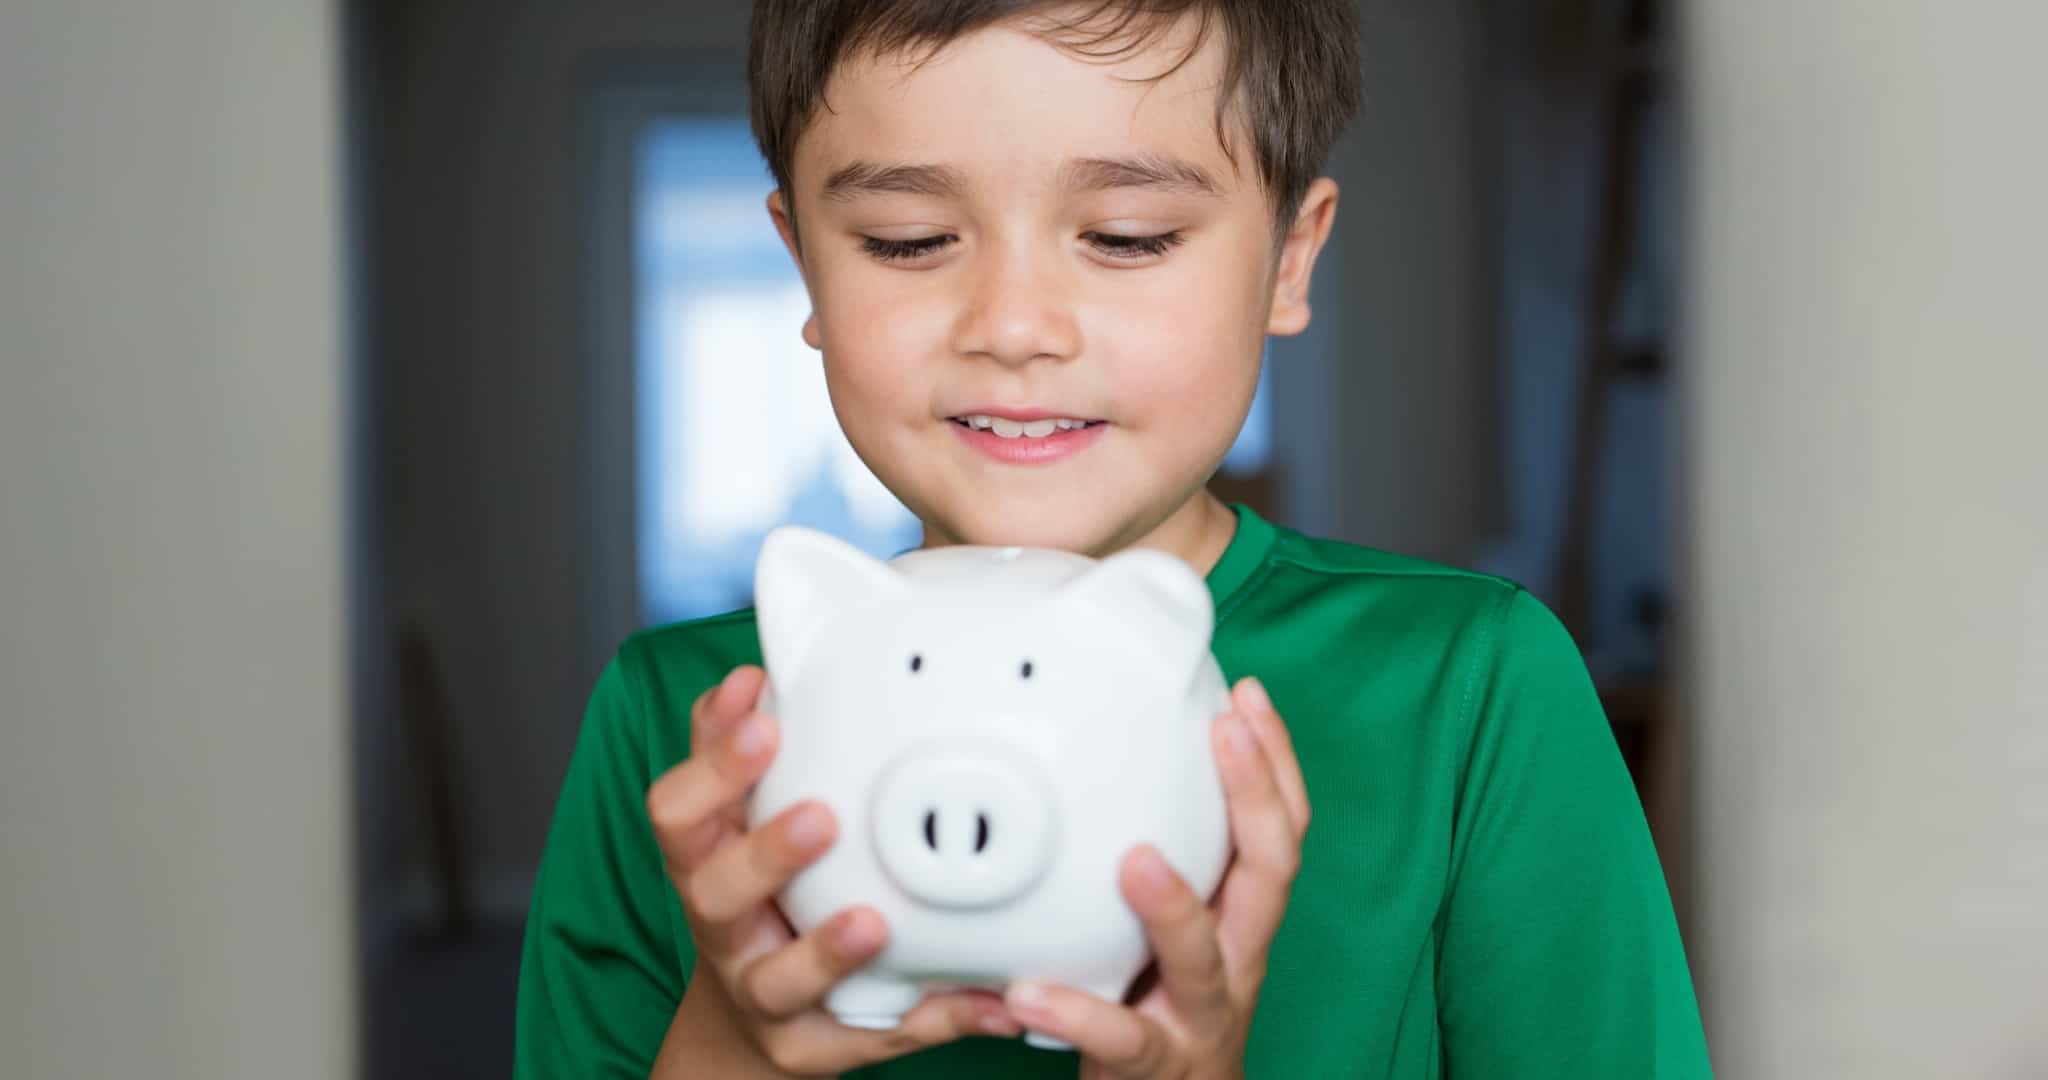 Child with piggy bank in hands learning financial decisions